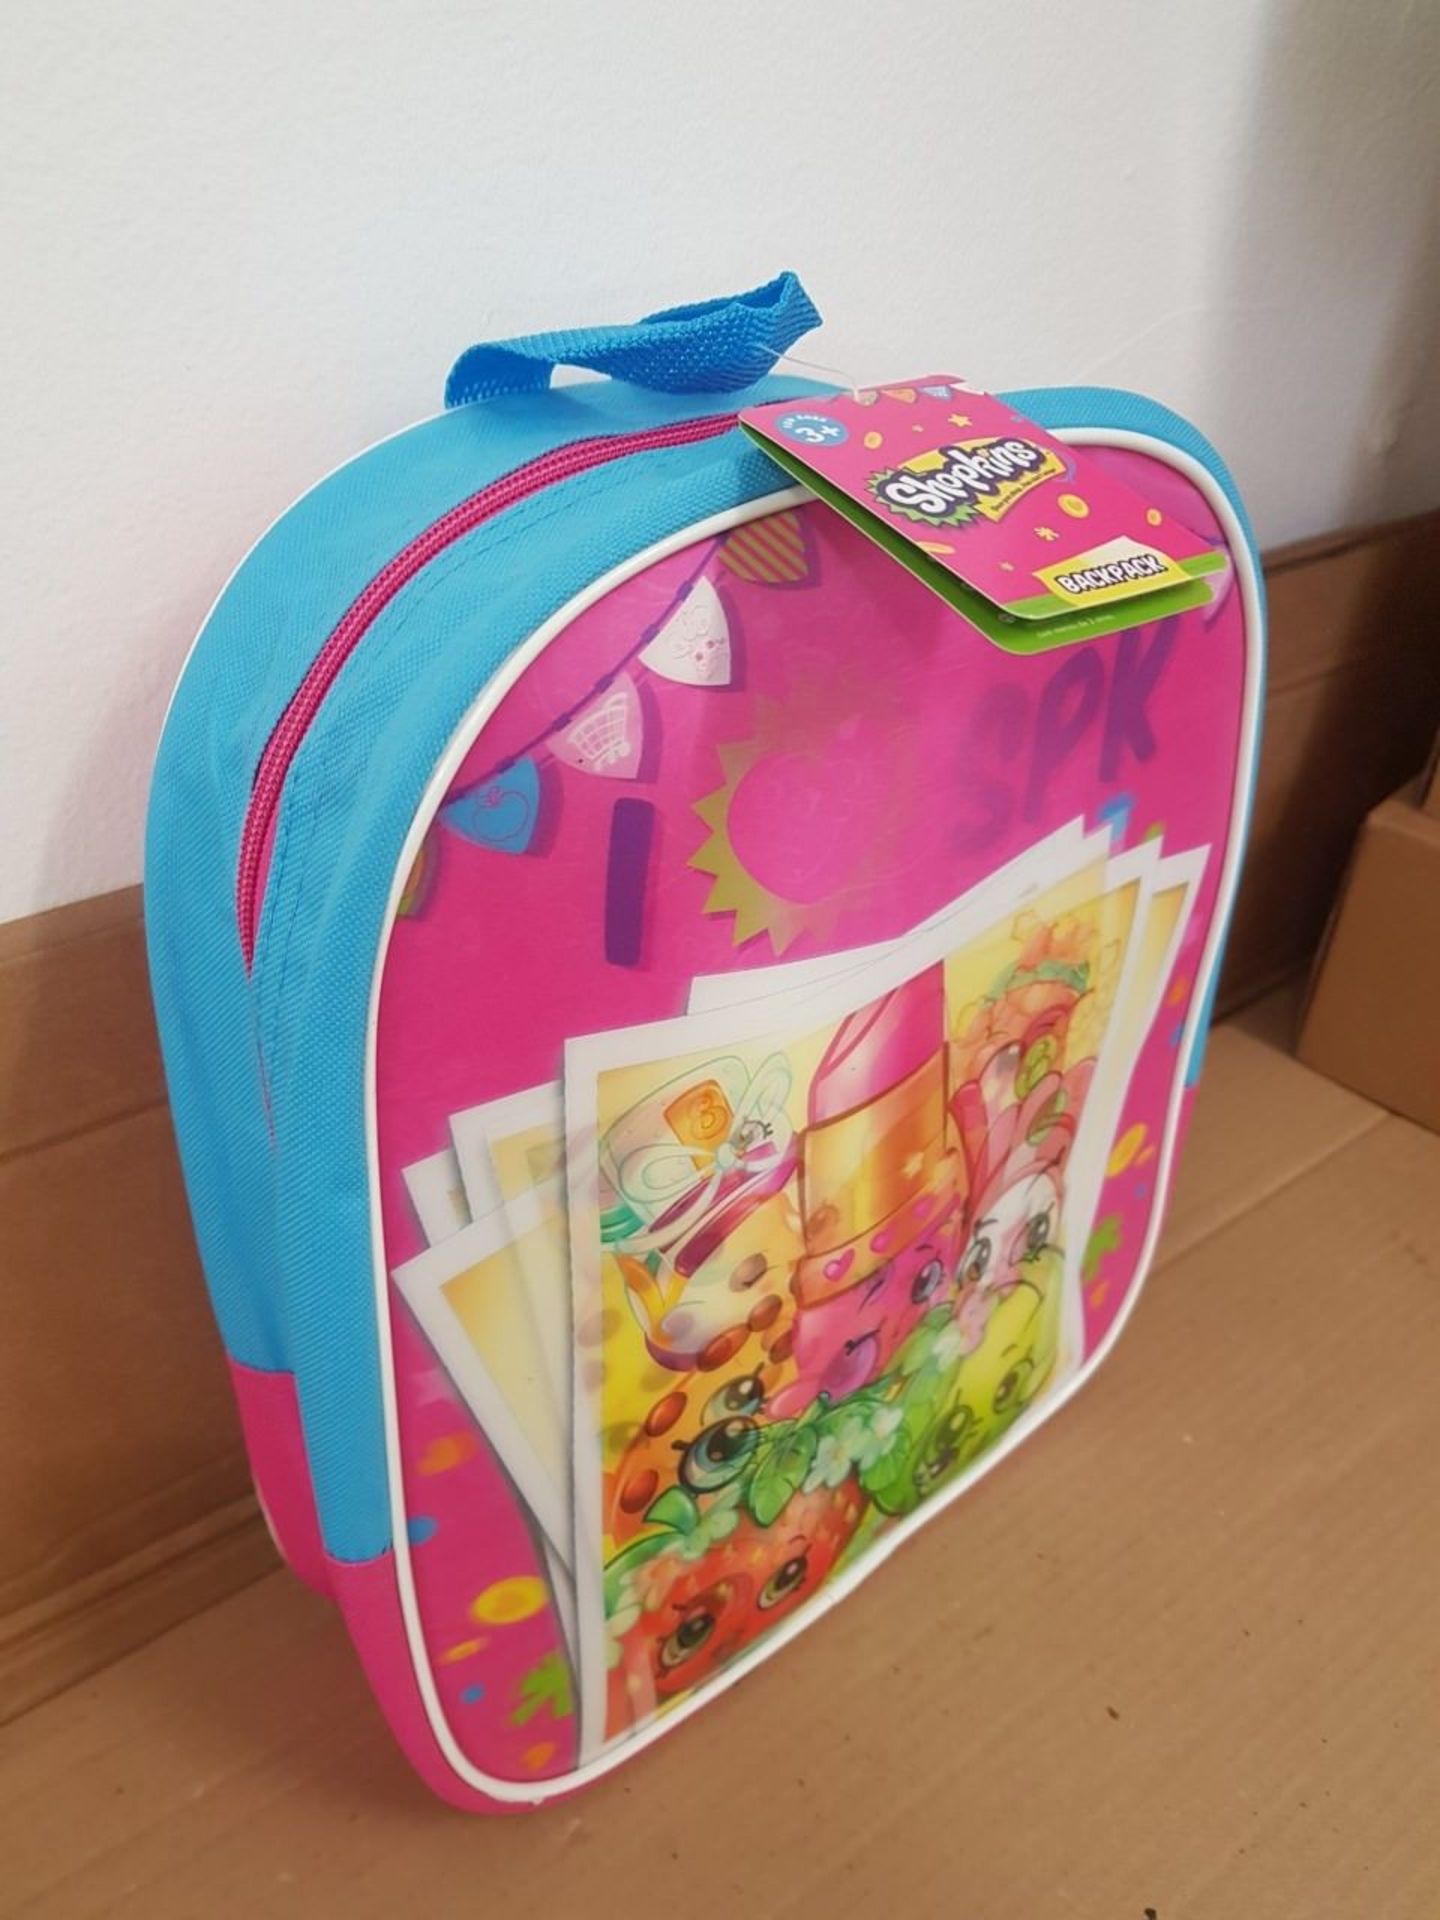 12 x BRAND NEW SHOPKINS LENTICULAR BACK PACKS. ORIGINAL RRP £12 EACH, GIVING THIS LOT A TOTAL - Image 2 of 4